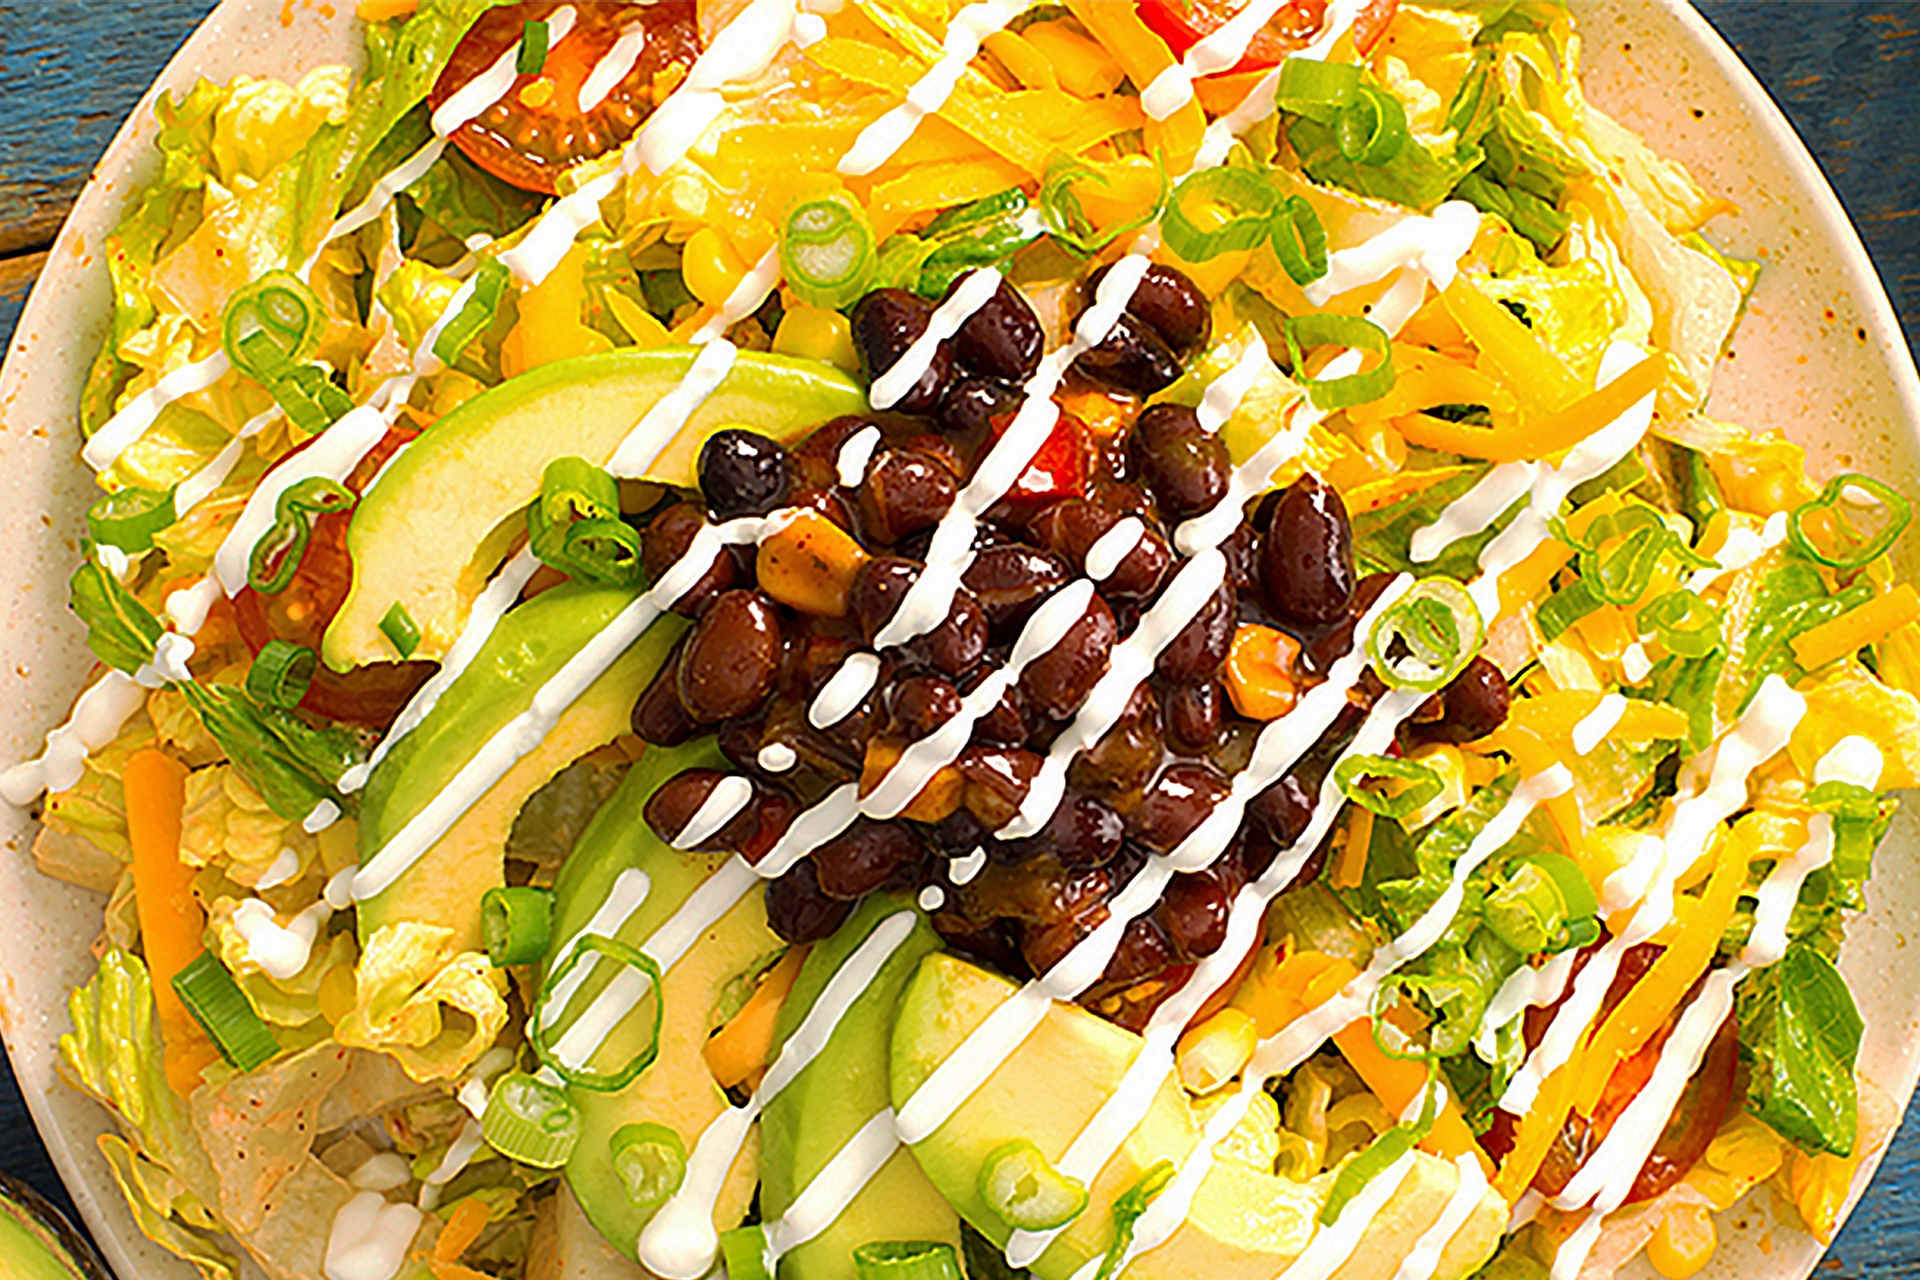 A close up of a taco salad with slices of avocado, Bush's Black Bean Fiesta and sour cream